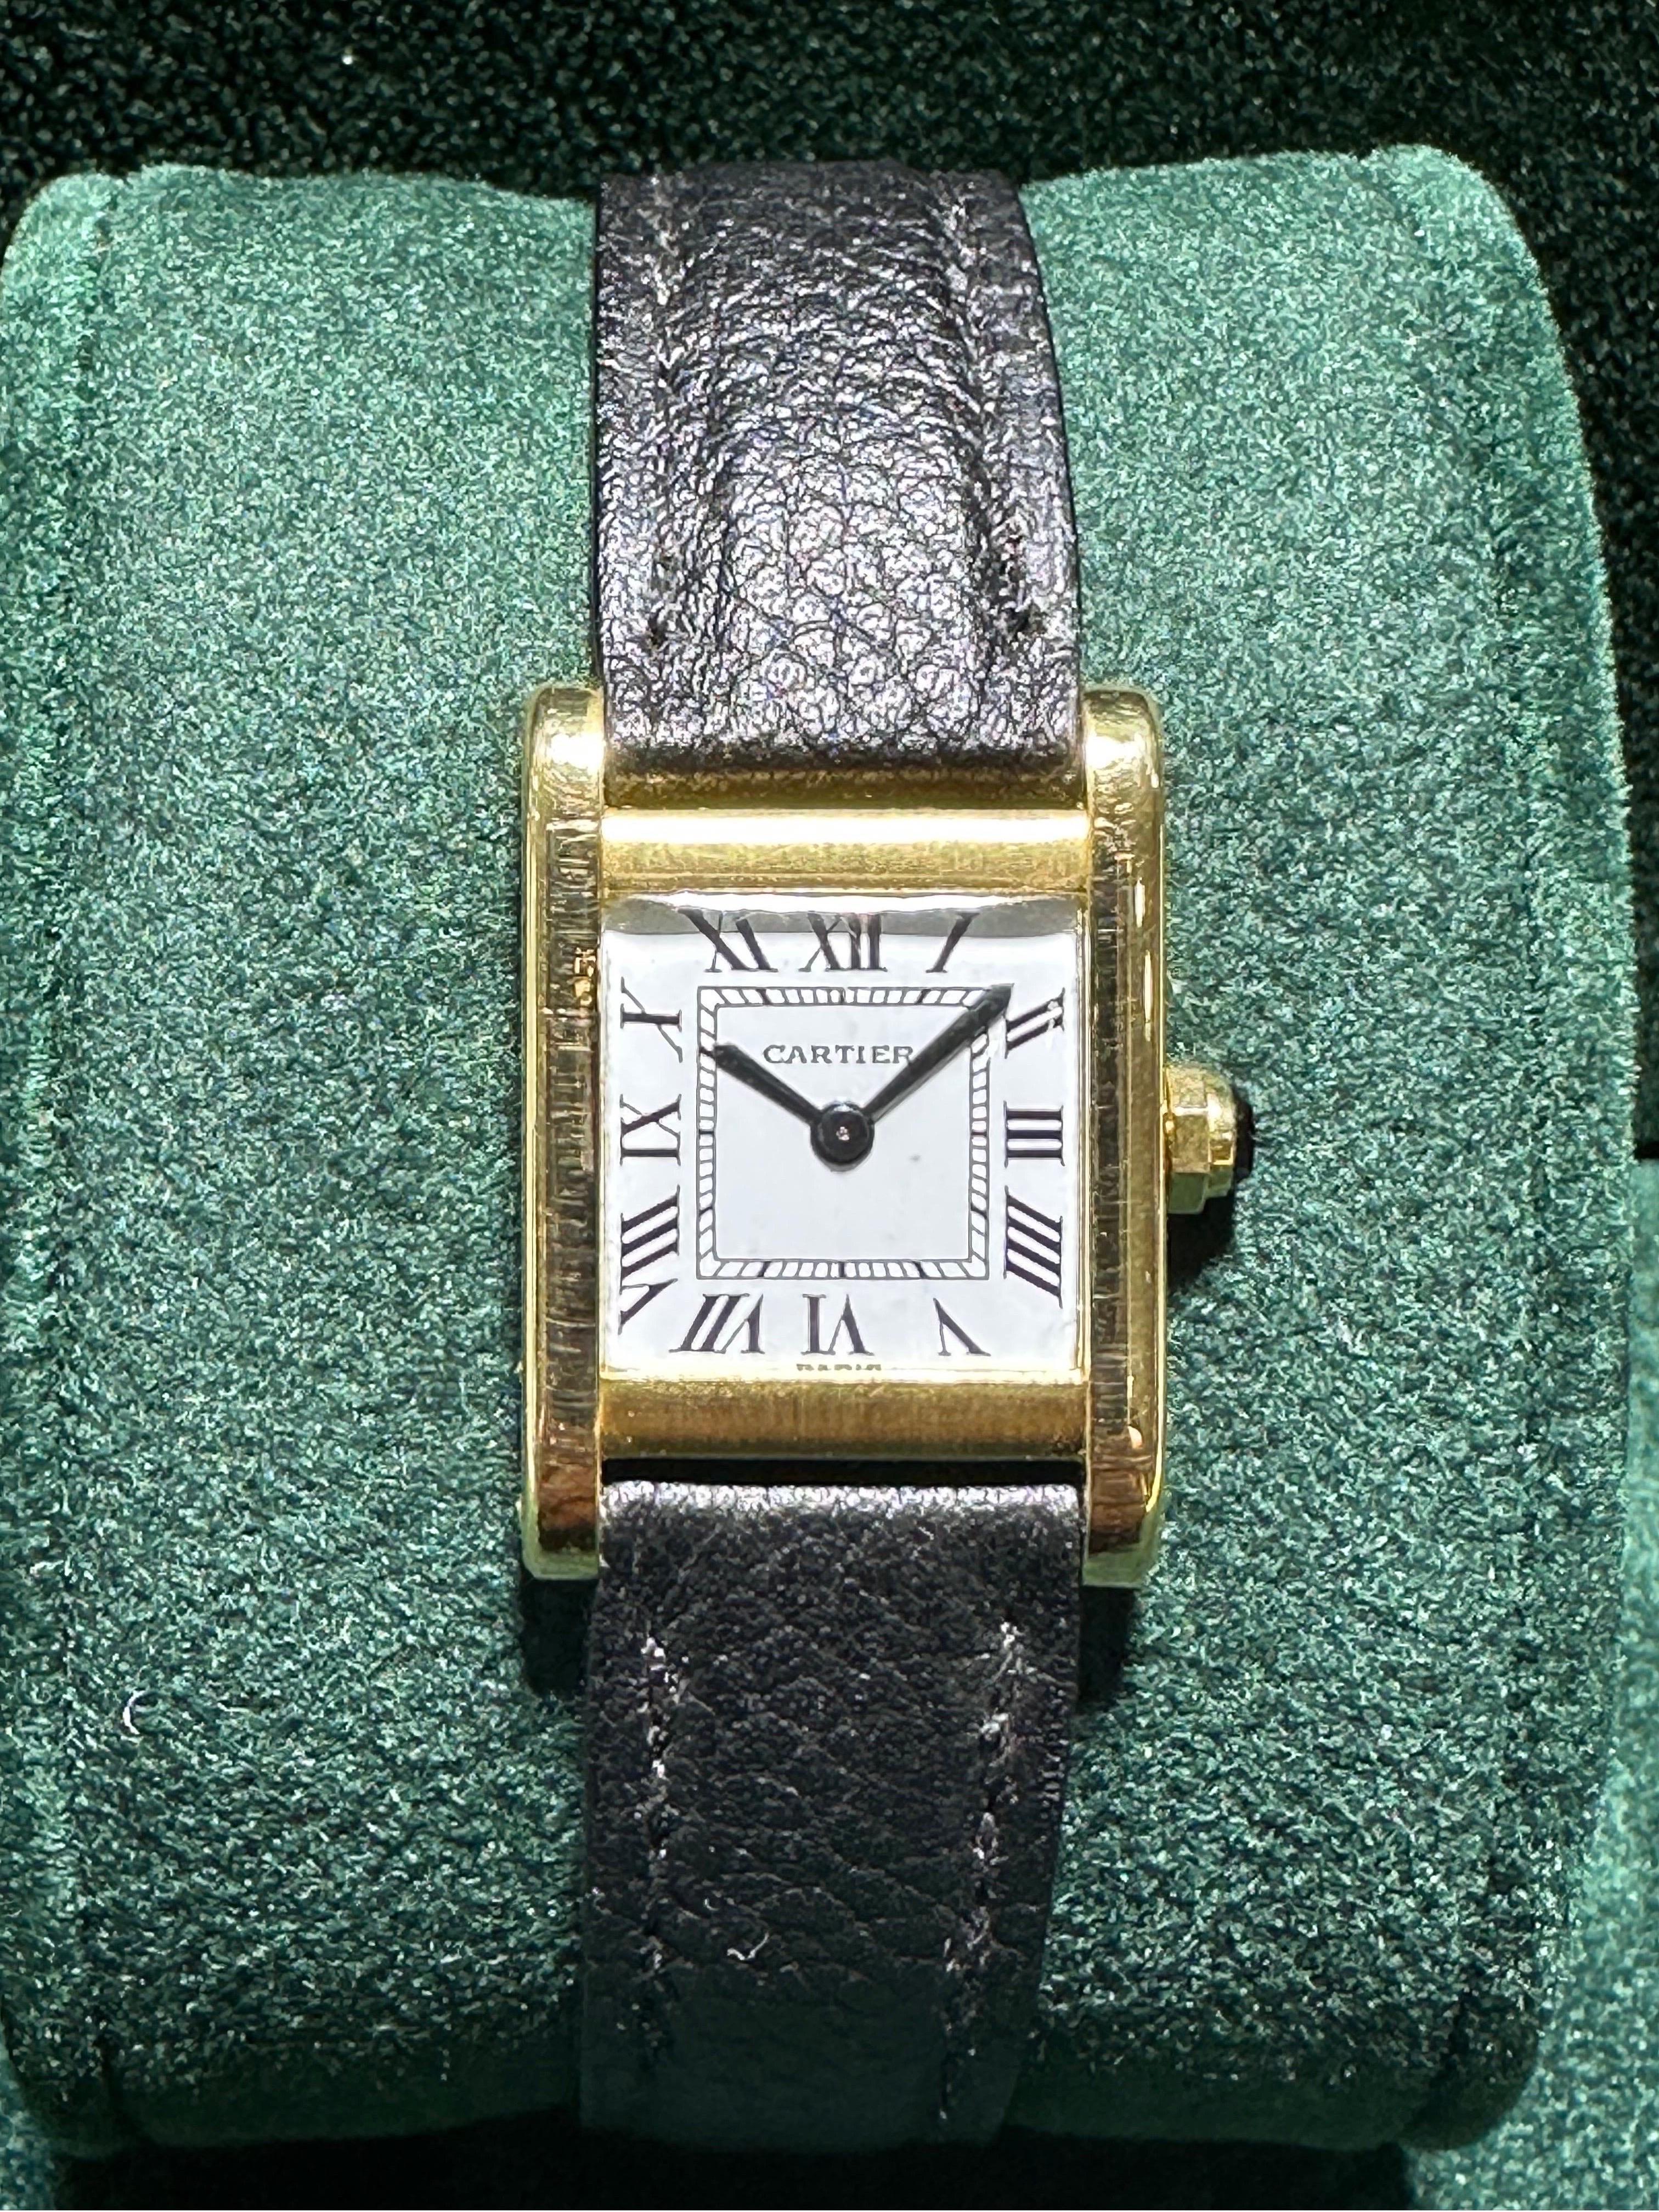 An early Cartier Tank Normale wristwatch for ladies from the 60s. The watch has a folding buckle and handwounded movement. Produced arround 1955 it has a Jaeger Lecoultre movement. Excellent condition!

In 1973, 12 models were commercialized within